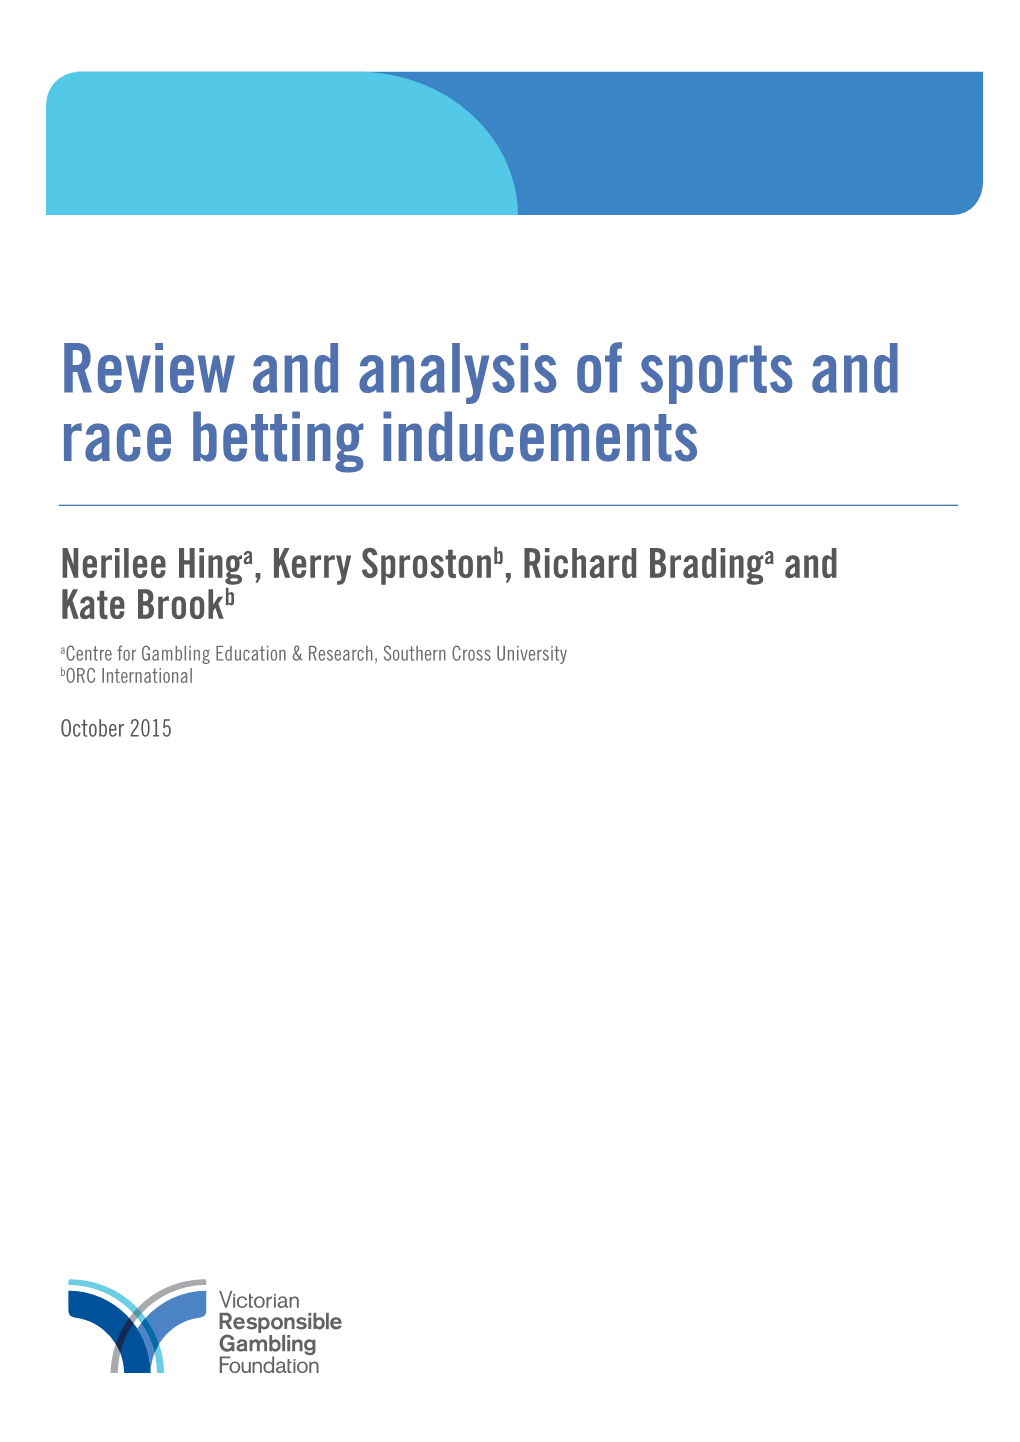 Review and Analysis of Sports and Race Betting Inducements